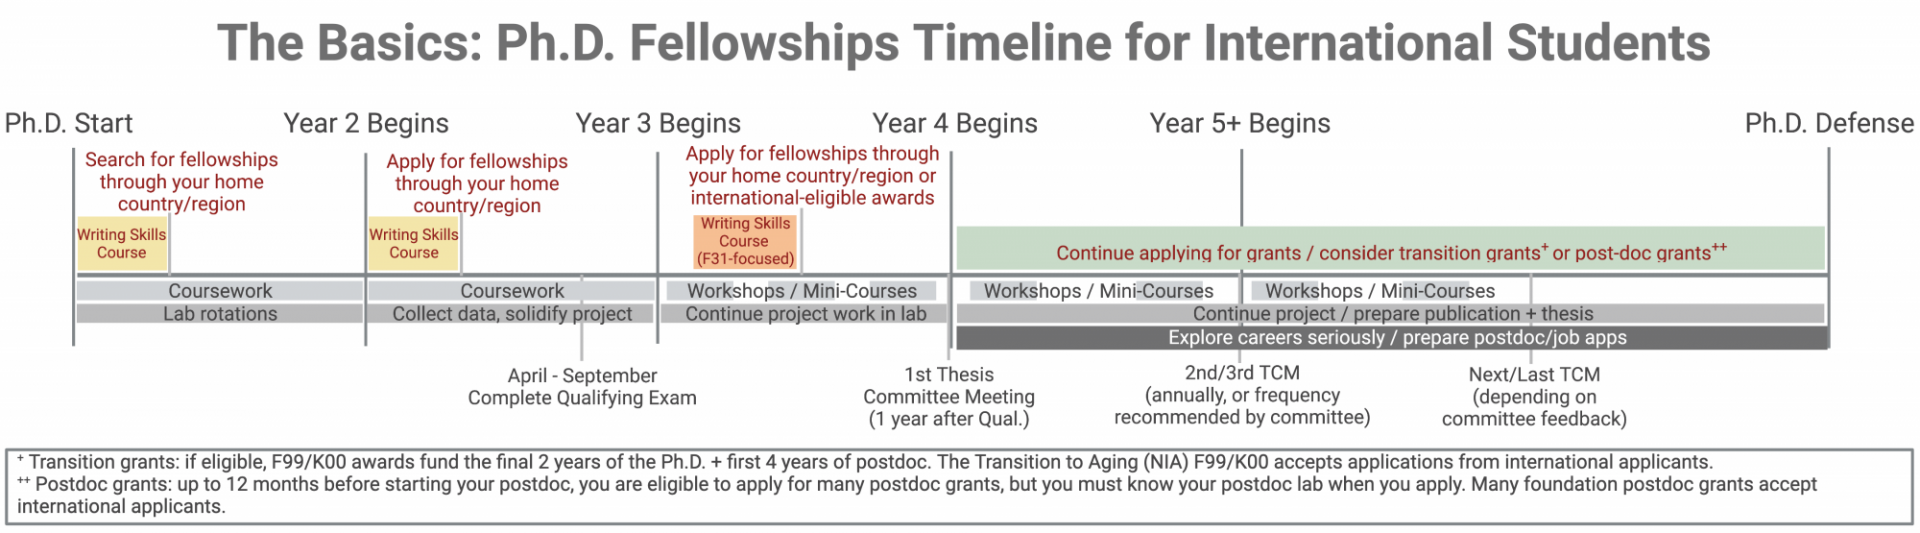 Ph.D. Basics for International students: shows milestones like searching and applying for grants from their home country/region, thesis committee meetings, and applying for transition and postdoc grants.